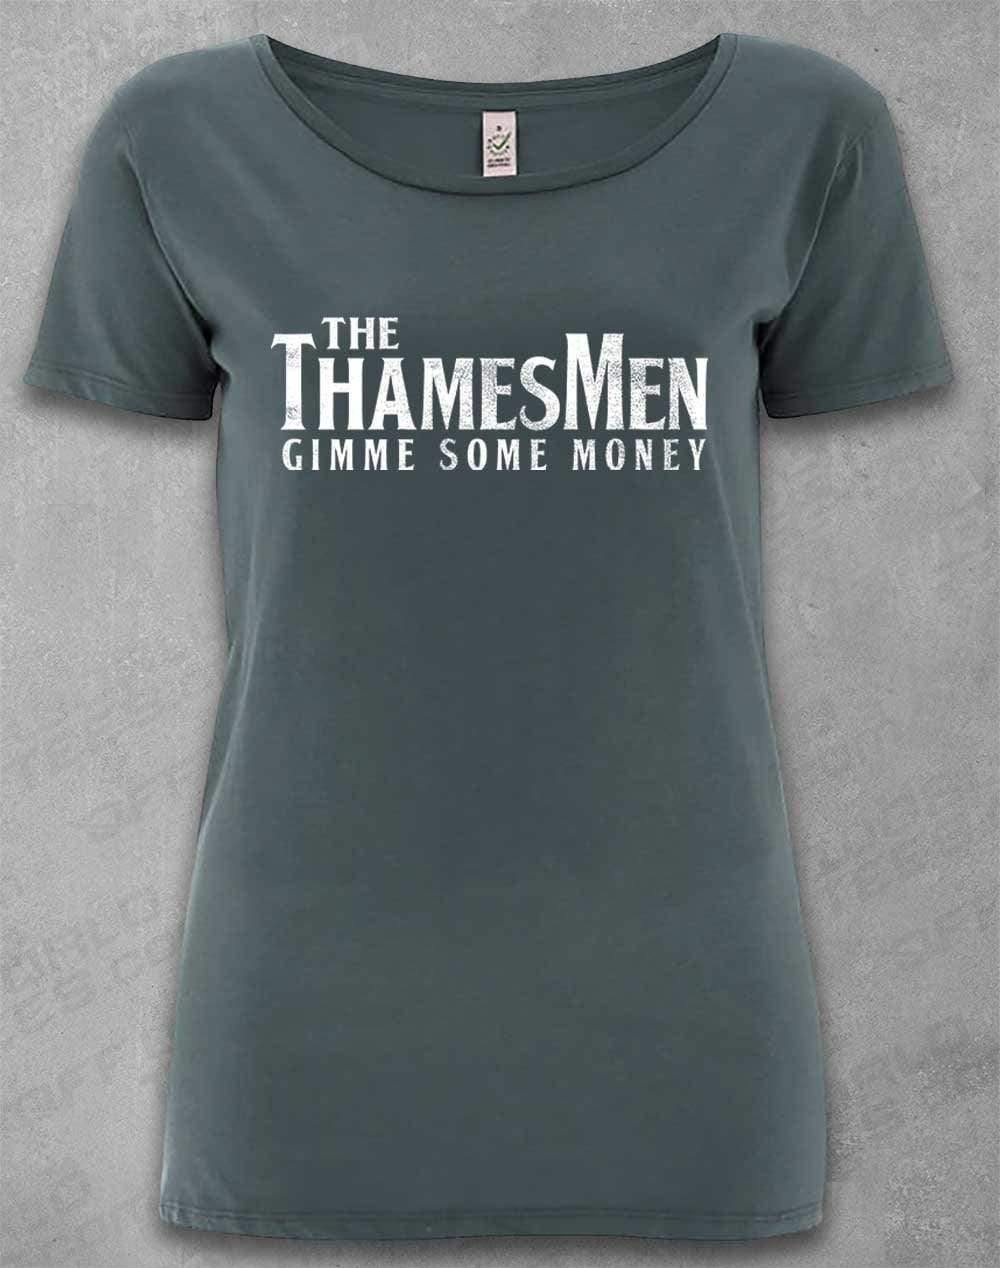 DELUXE The Thamesmen Gimme Some Money Organic Scoop Neck T-Shirt 8-10 / Light Charcoal  - Off World Tees